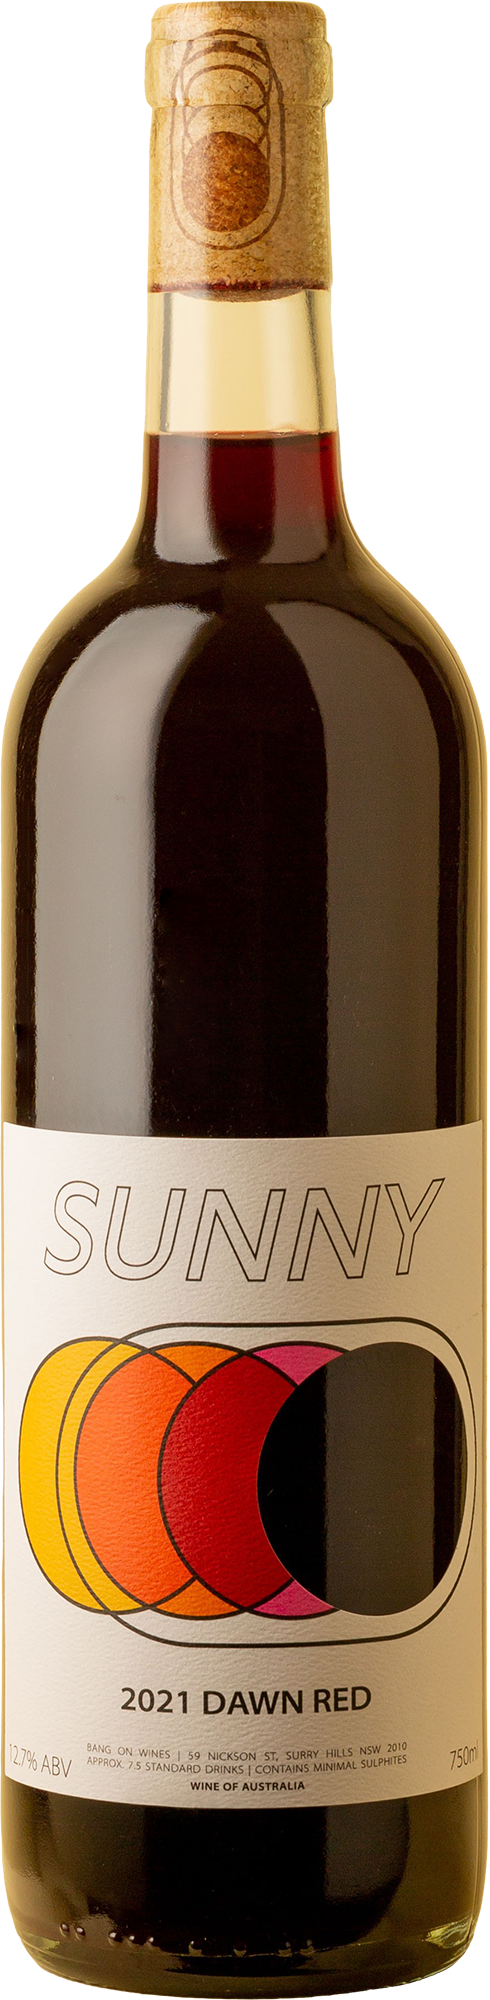 Sunny - Dawn Red Blend 2021